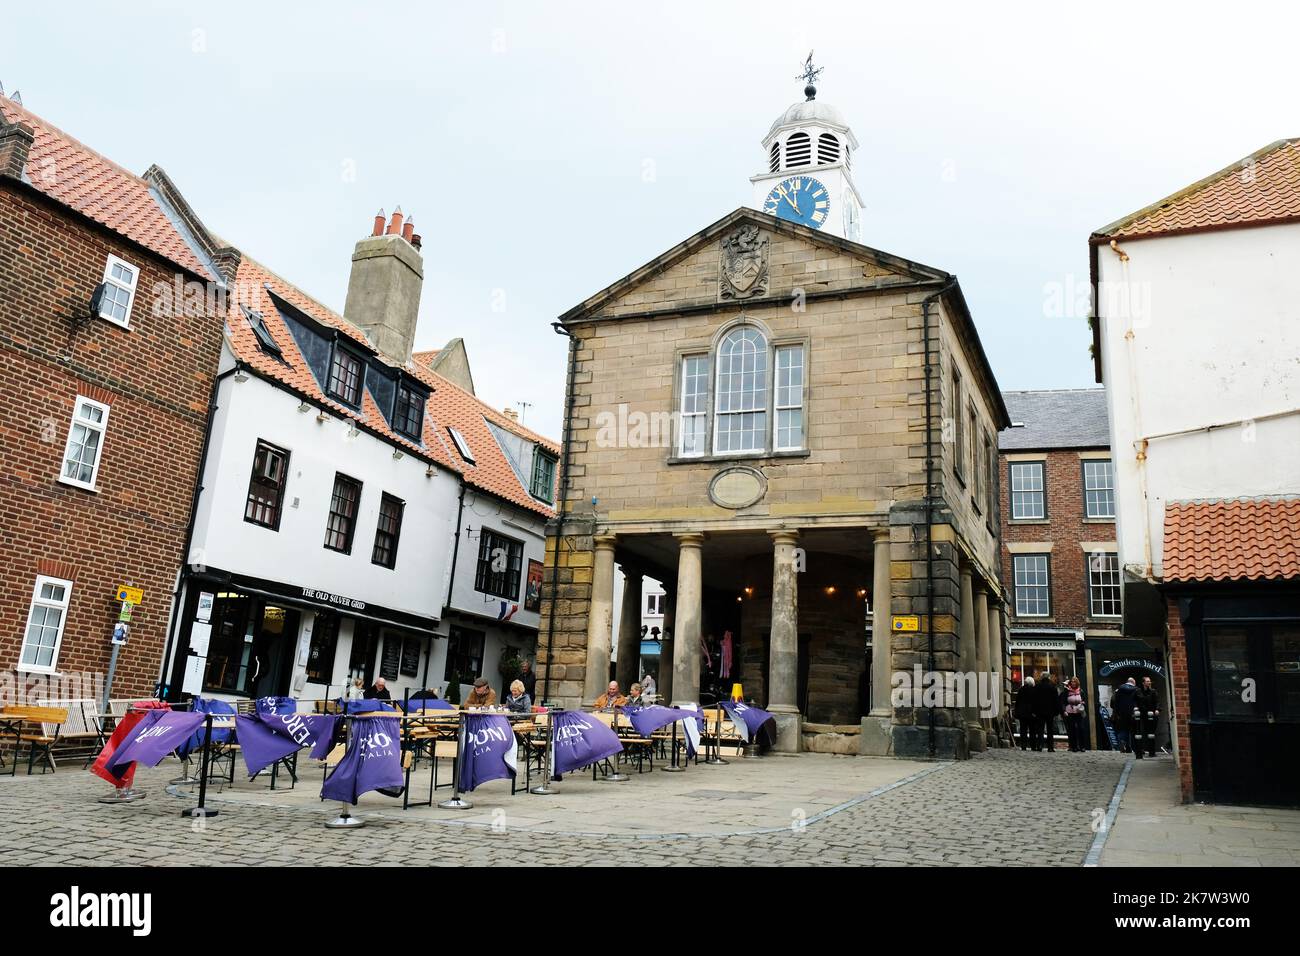 The Old Town Hall and market place now an open air Cafe, Whitby, Yorkshire, UK - John Gollop Stock Photo